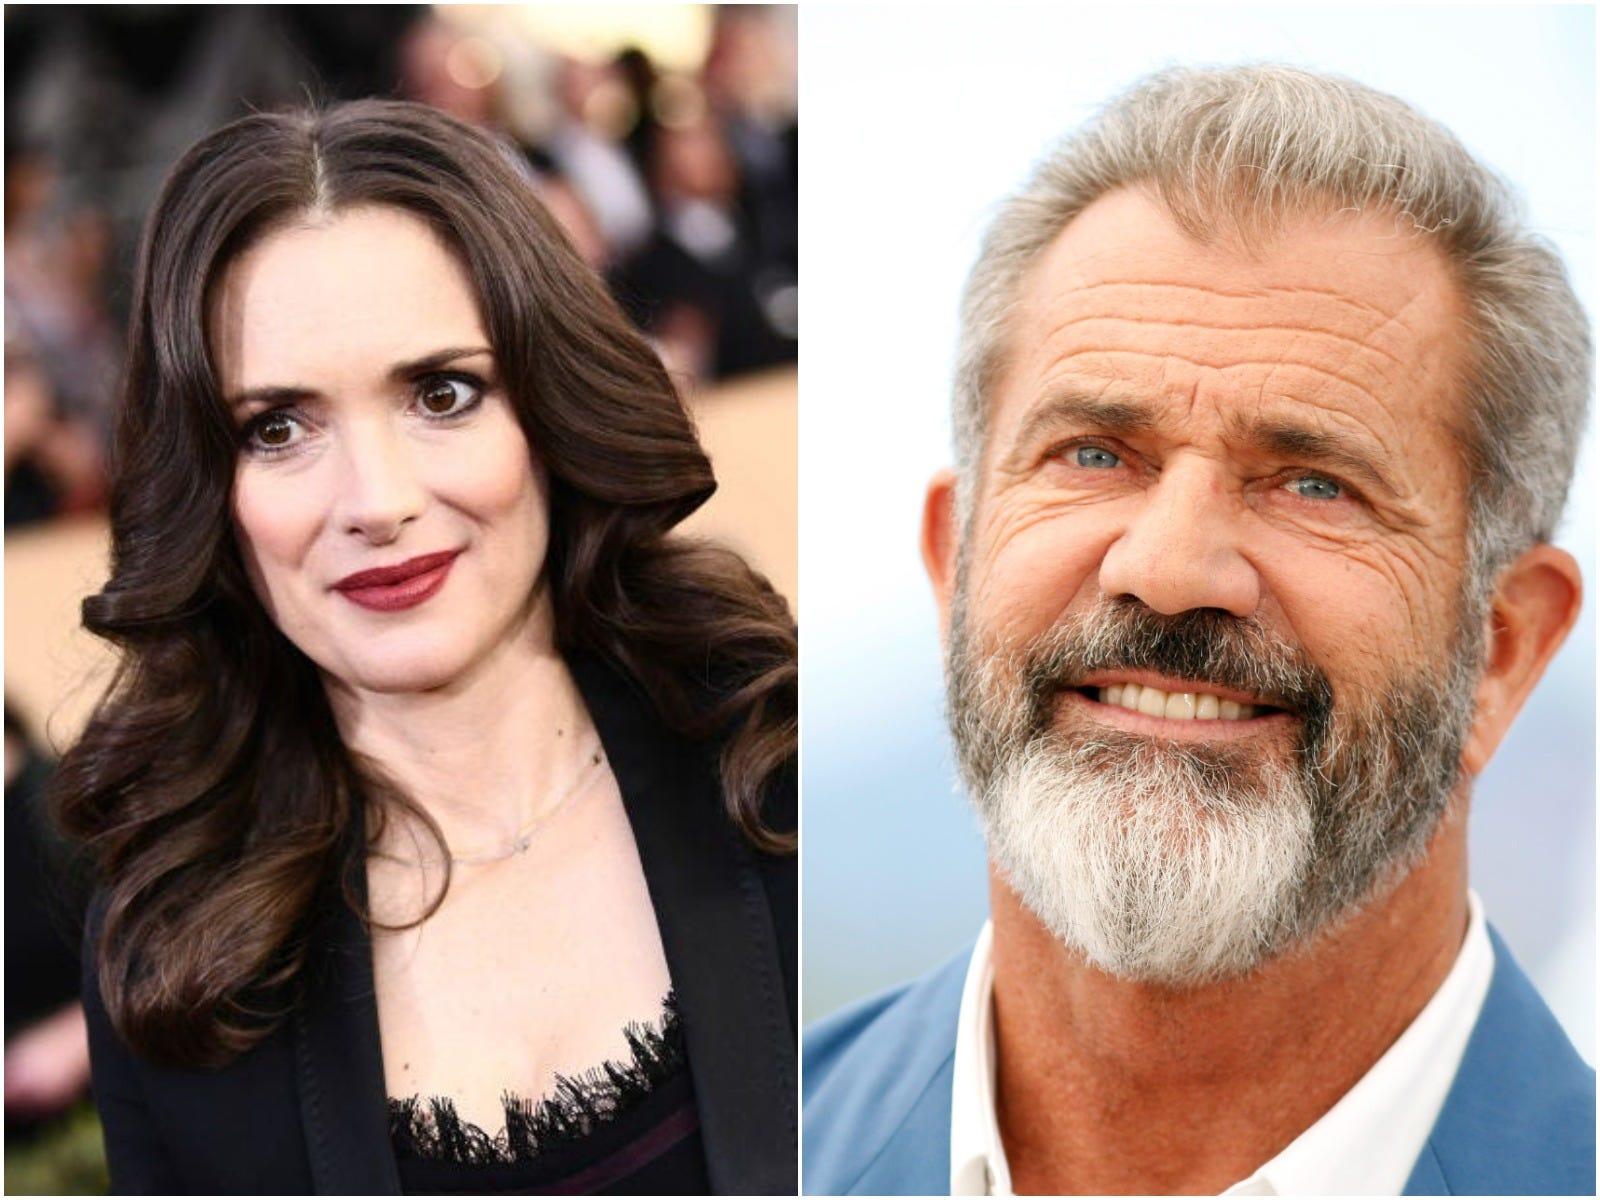 Winona Ryder Said Mel Gibson Once Asked If She Was An Oven Dodger Business Insider India 5111